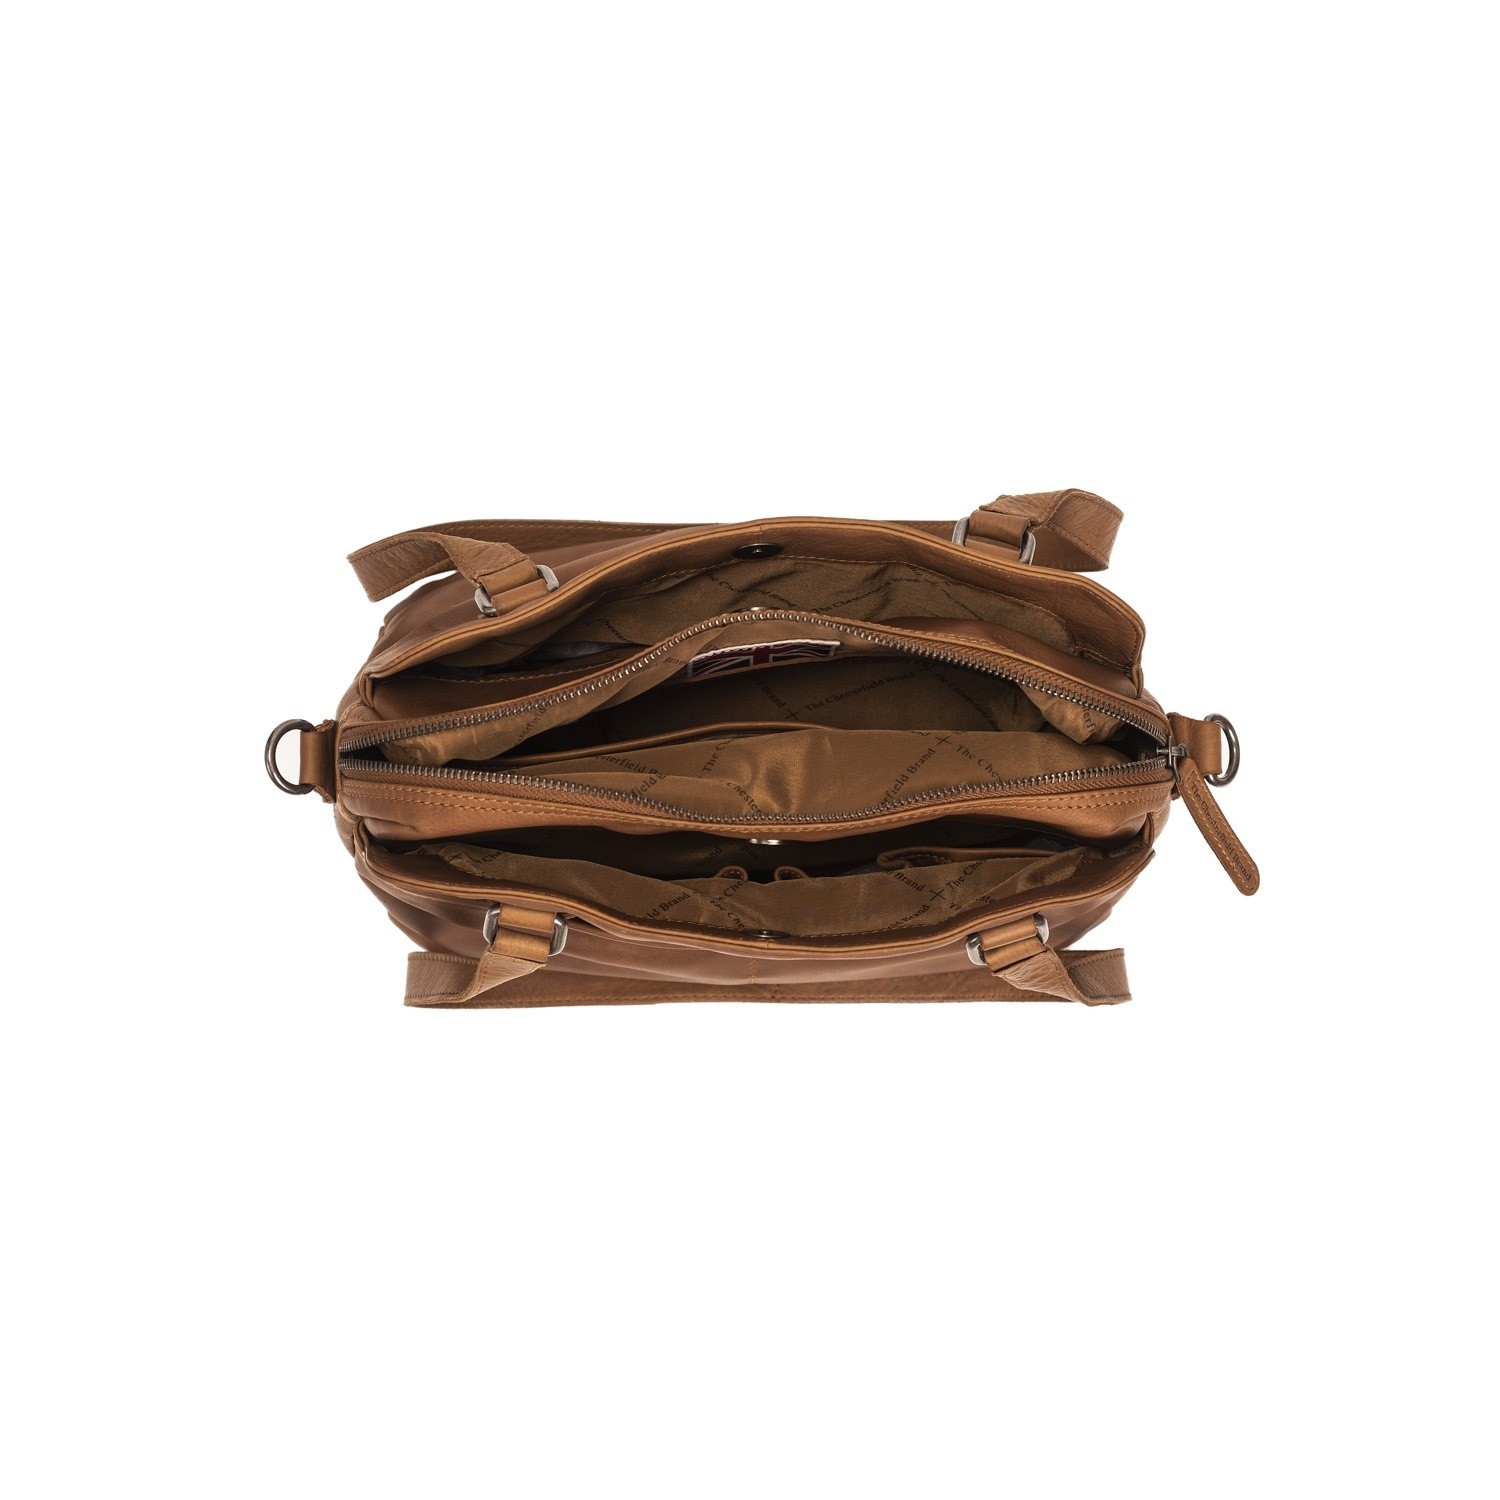 Leather Shoulder Bag Cognac Bilbao - The Chesterfield Brand